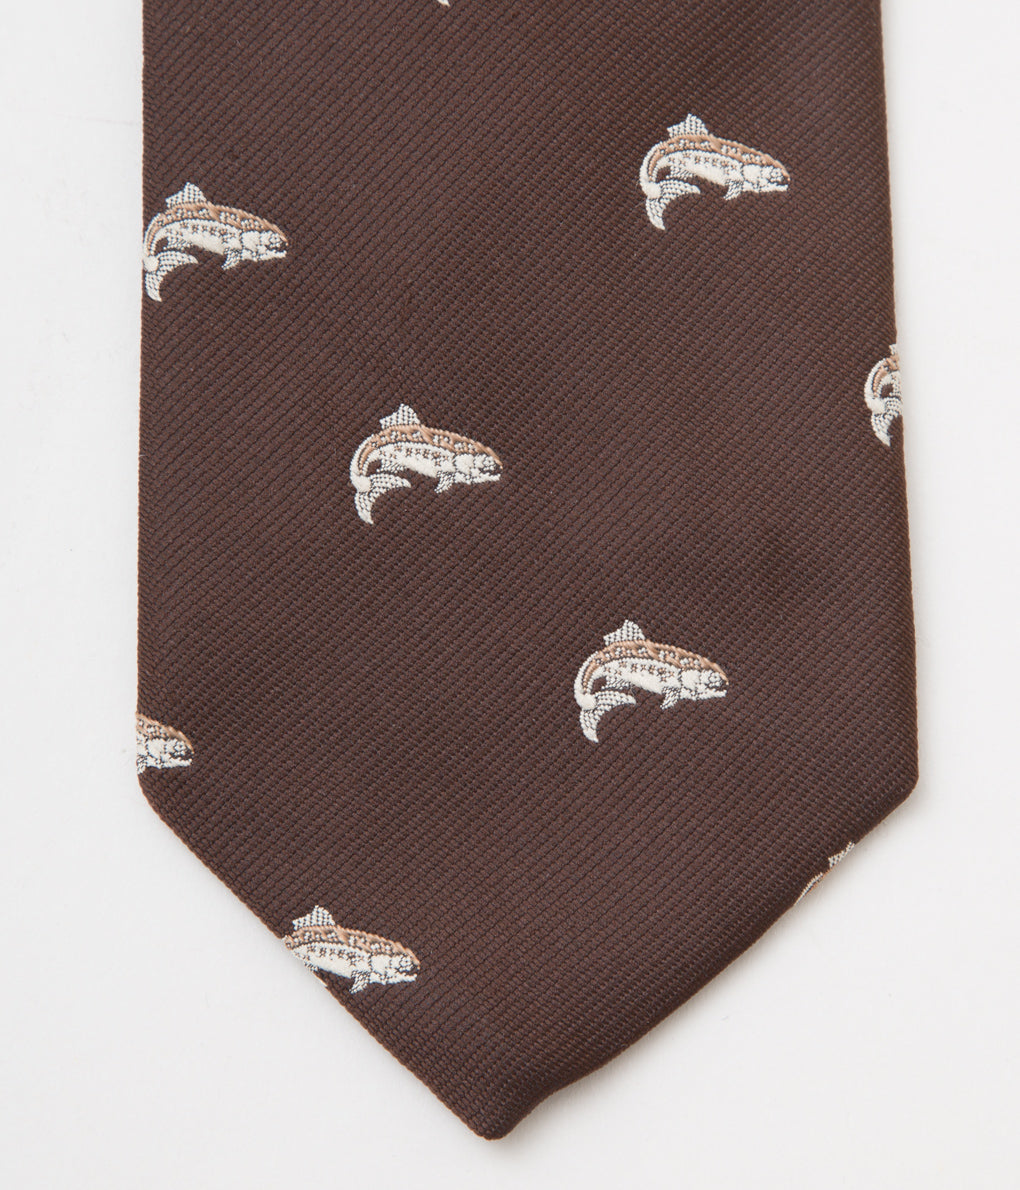 FROM USA "O'CONNELL LUCAS-CHELF EMBROIDERED TIE BROWN FISH"(BROWN)